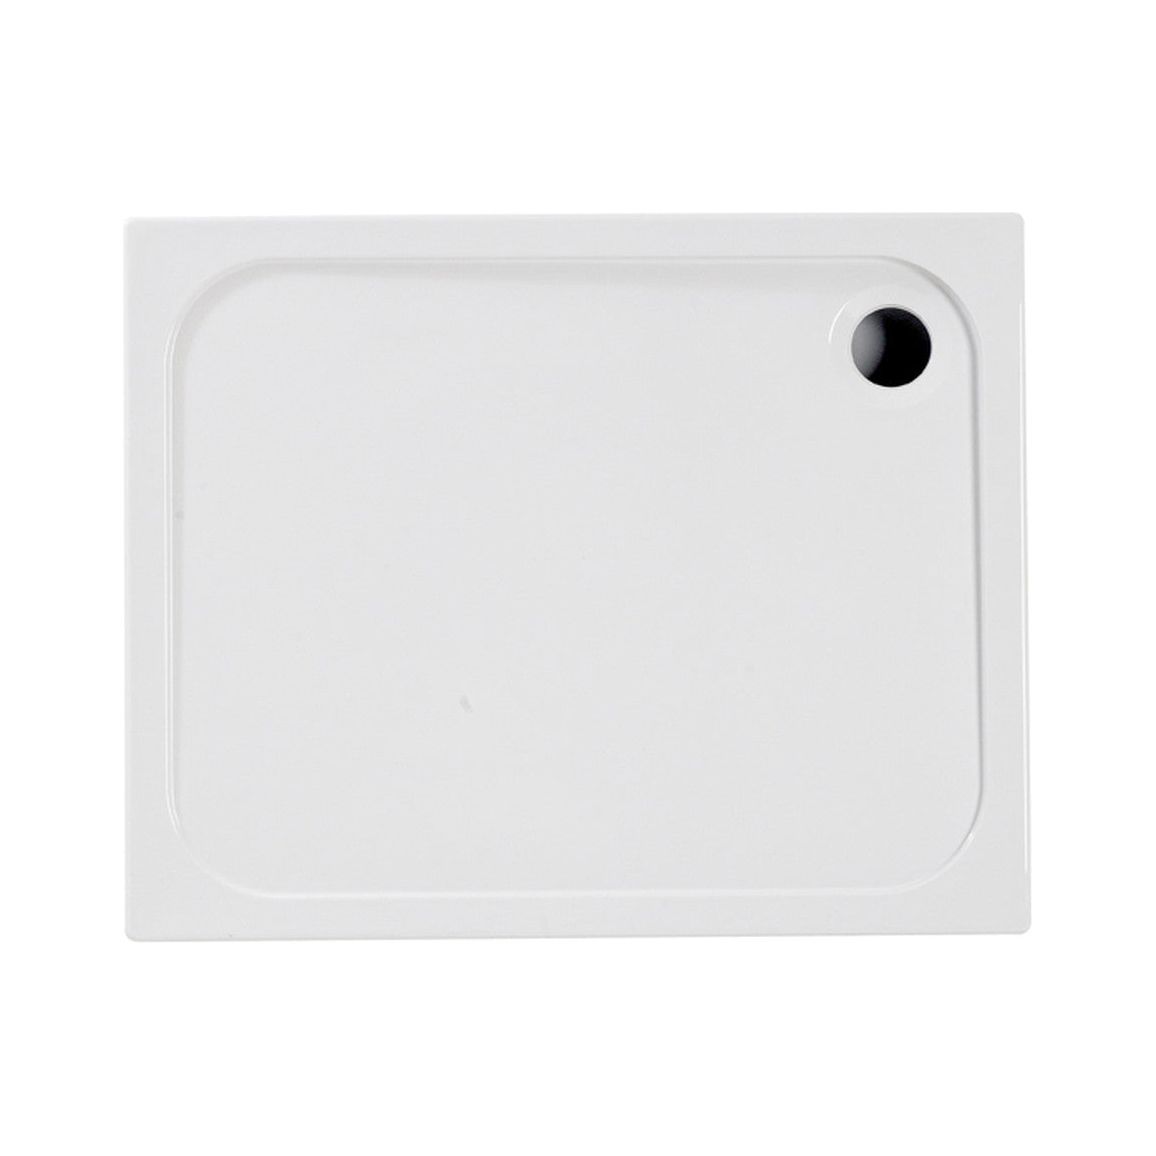 45mm Low Profile 1680x760mm Rectangular Tray & Waste